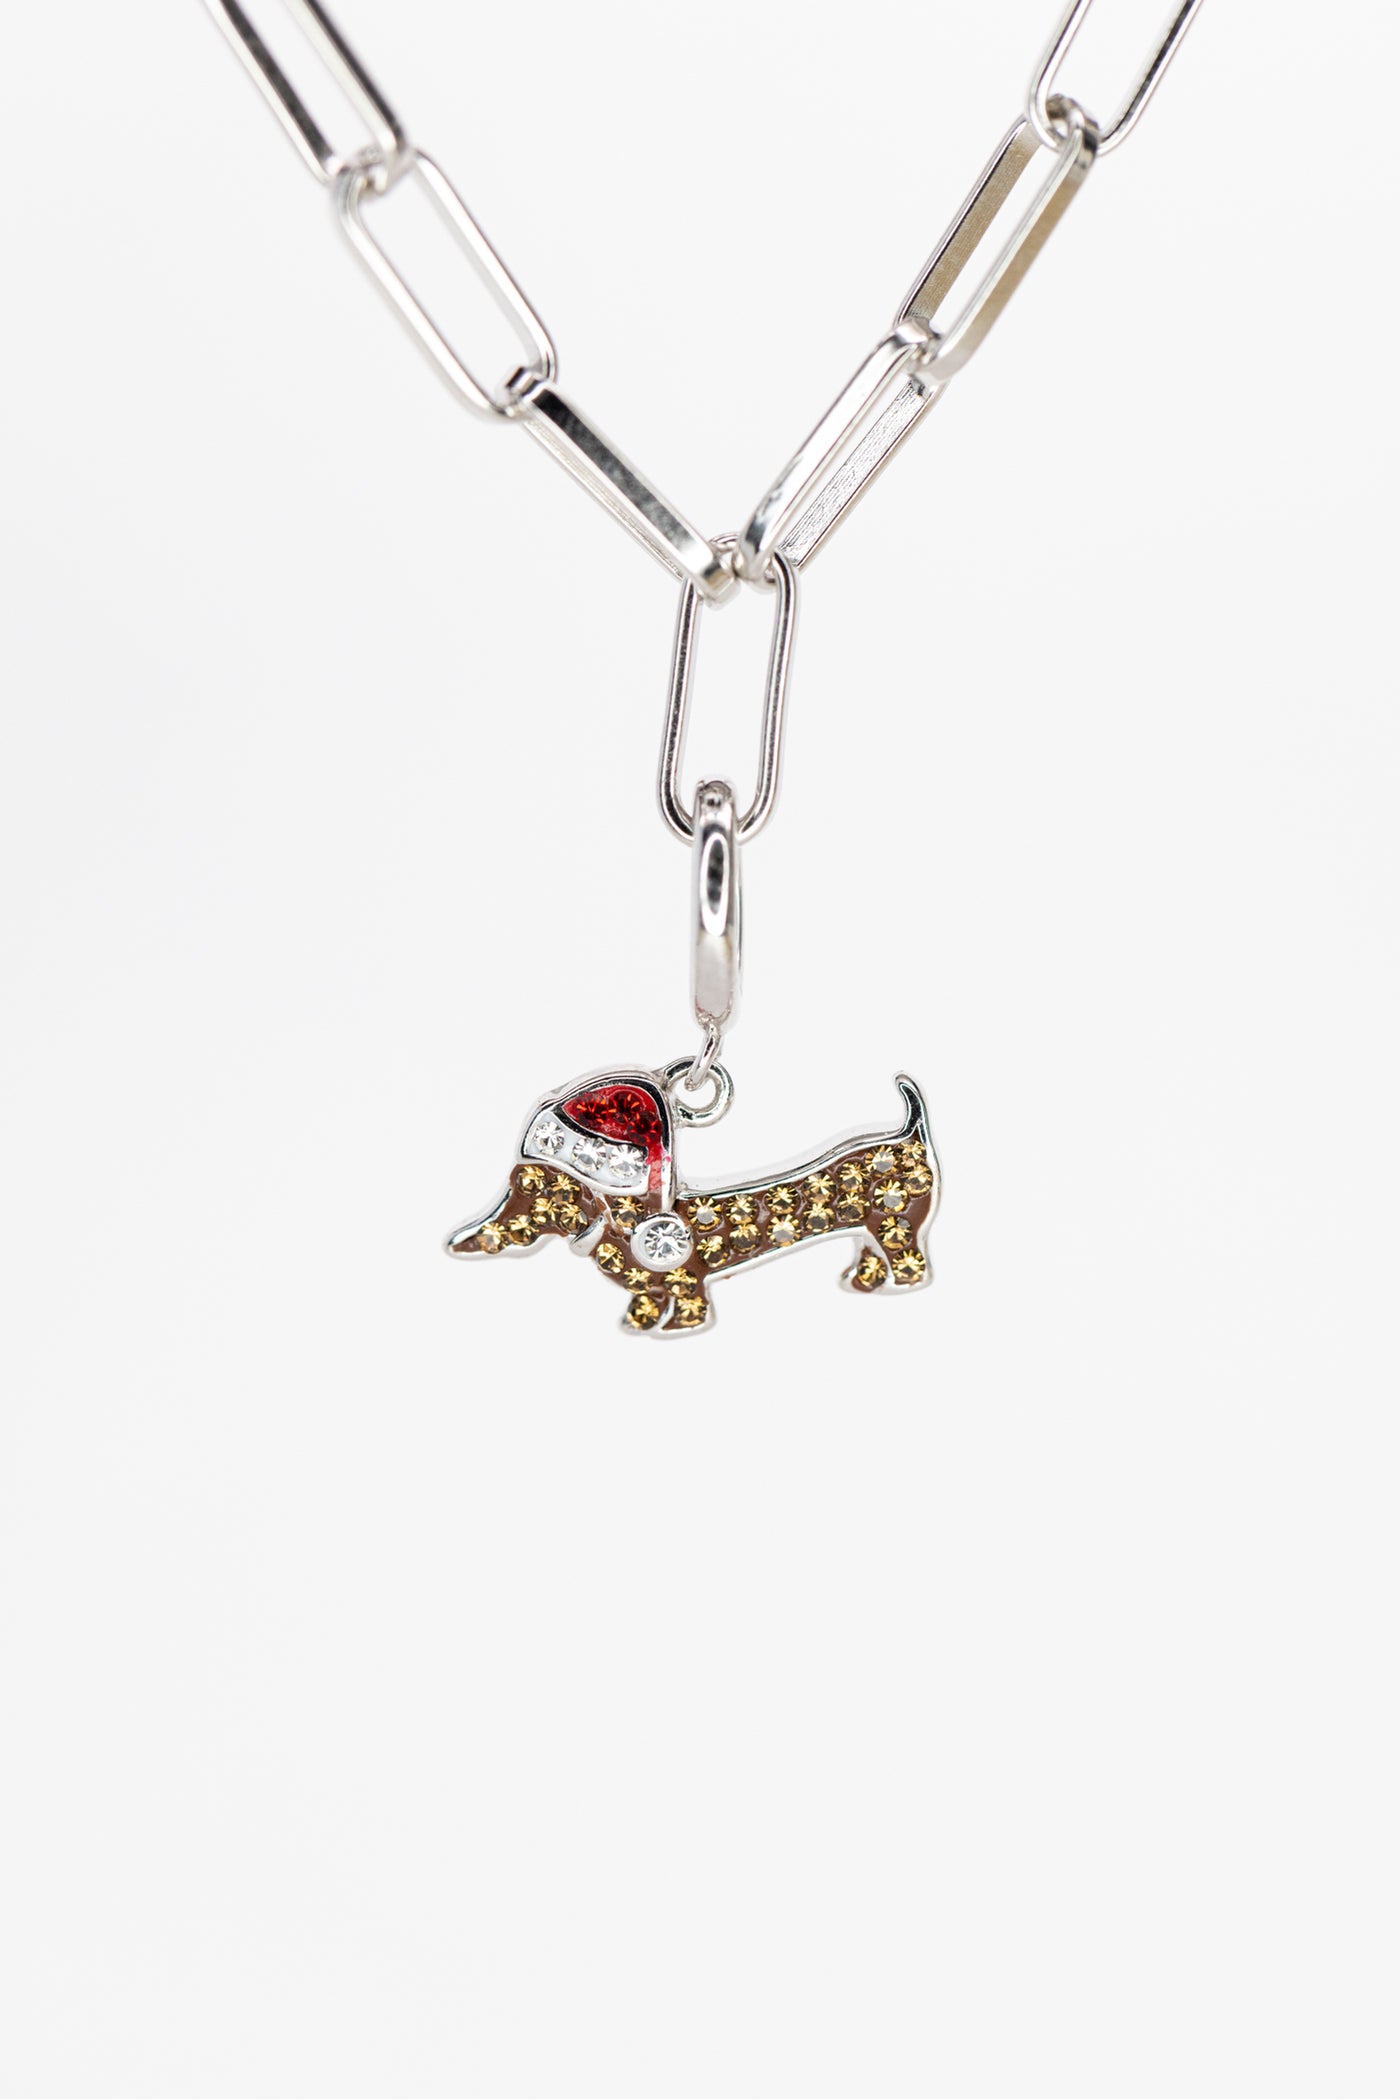 Holiday Dachshund Dog Crystal Sterling Silver Charm With Paperclip Bracelet